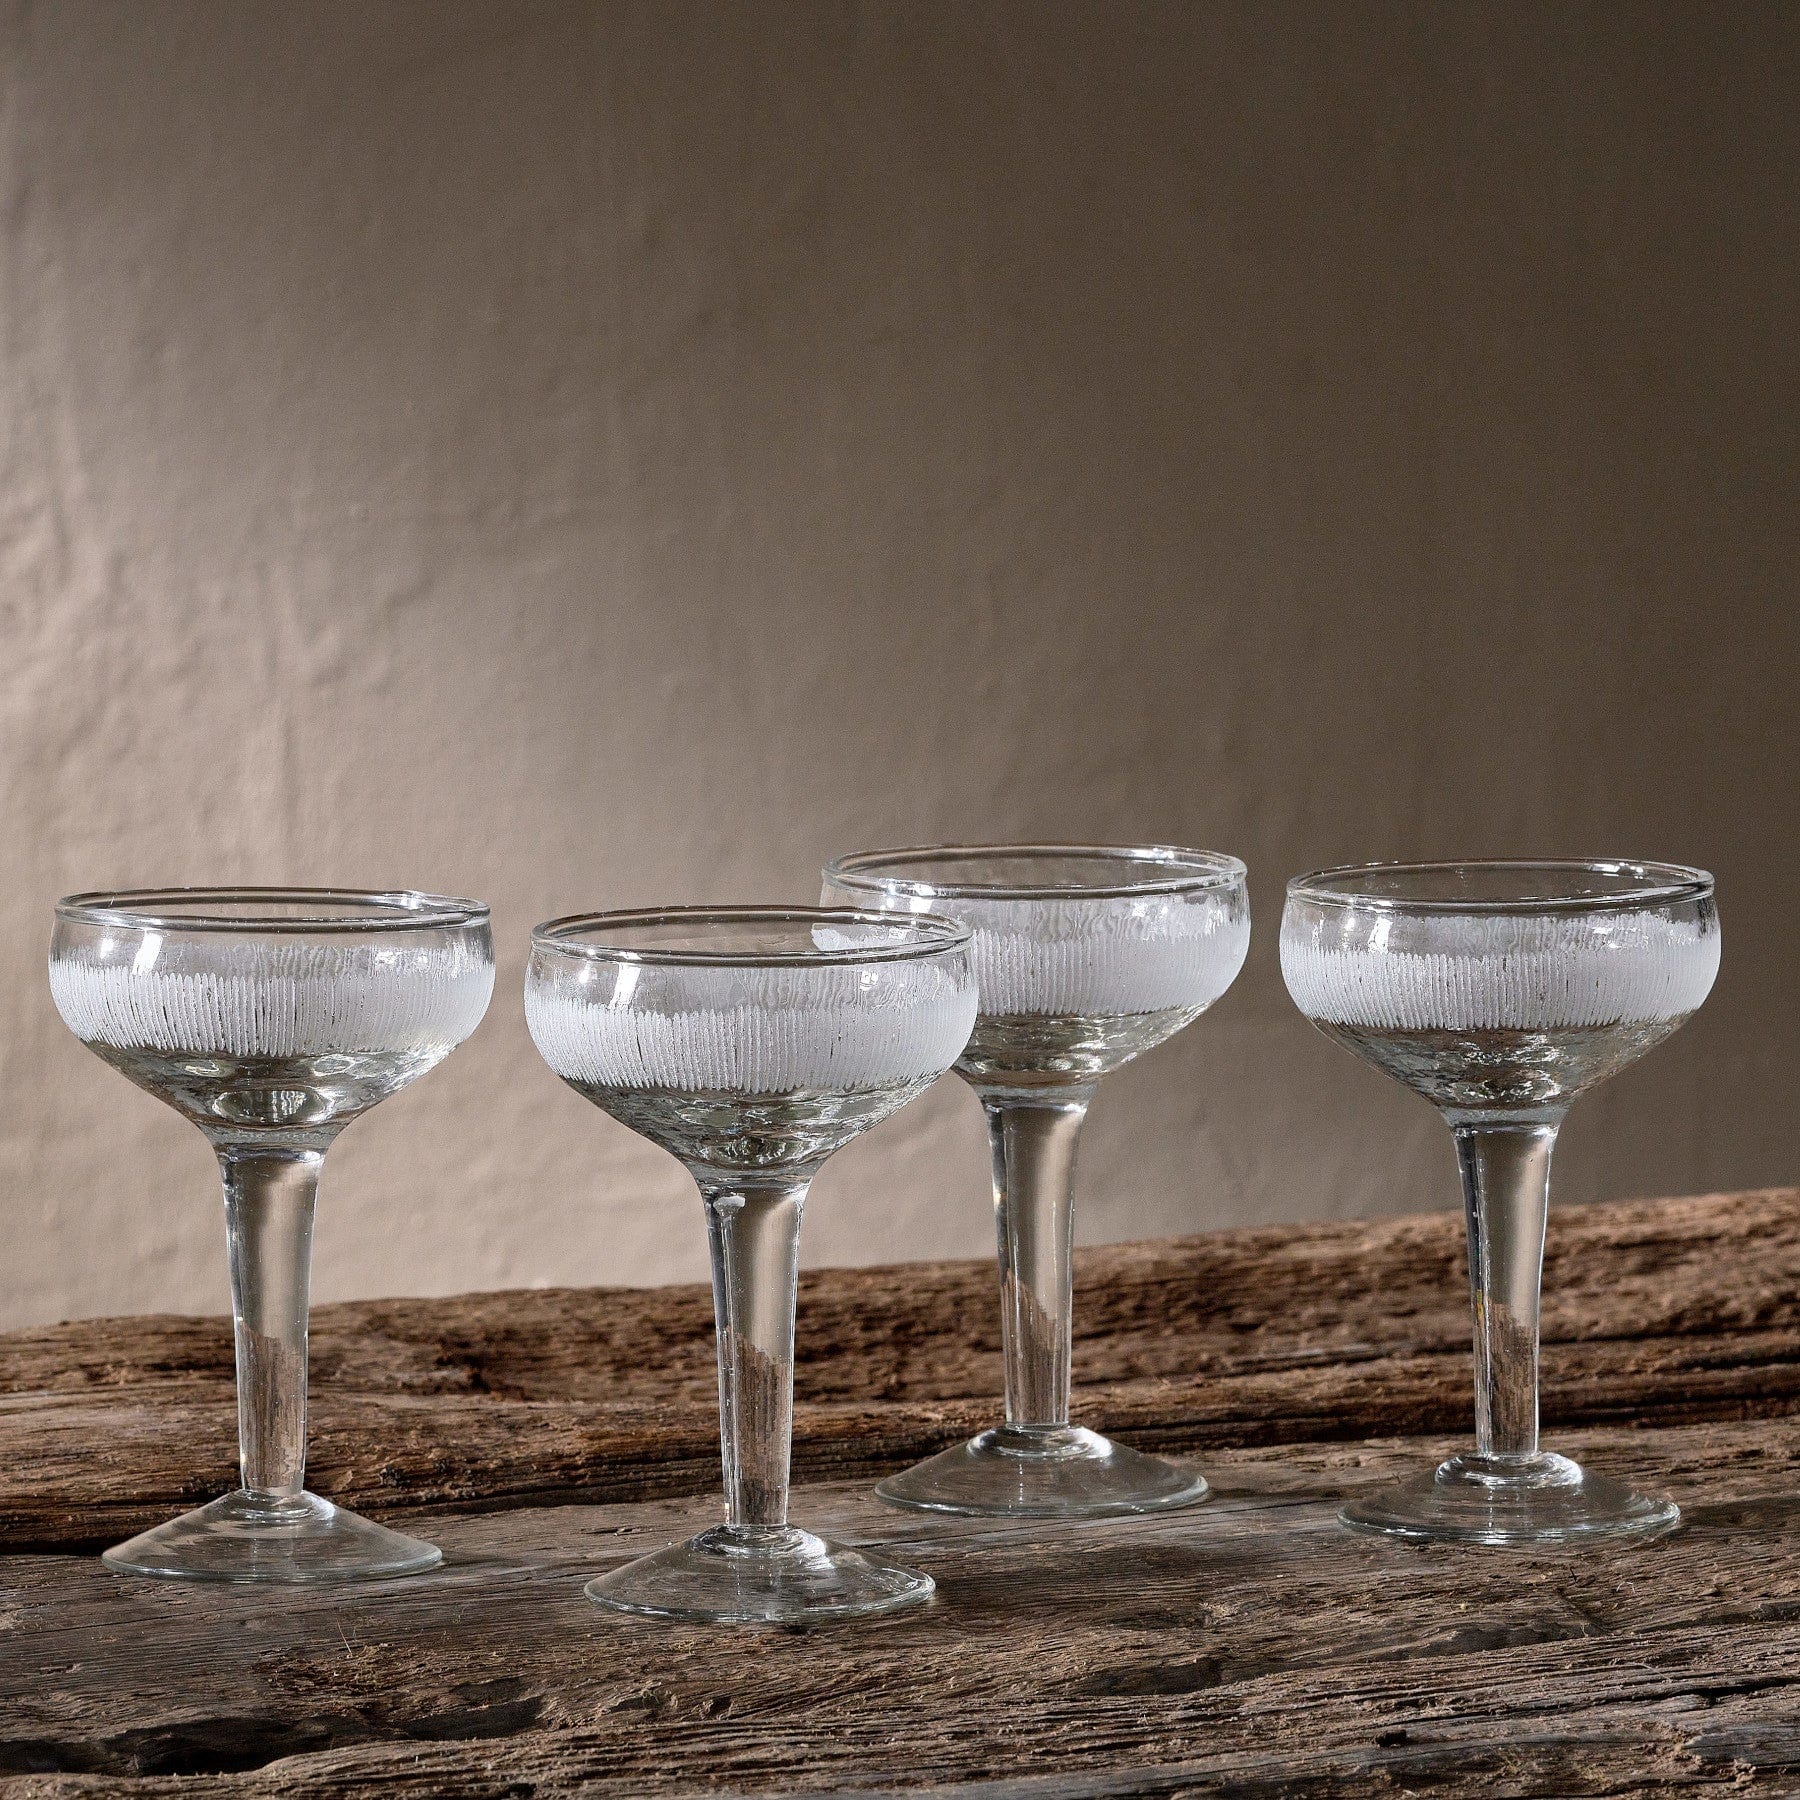 Vintage crystal champagne coupe glasses on rustic wooden surface with textured gray background